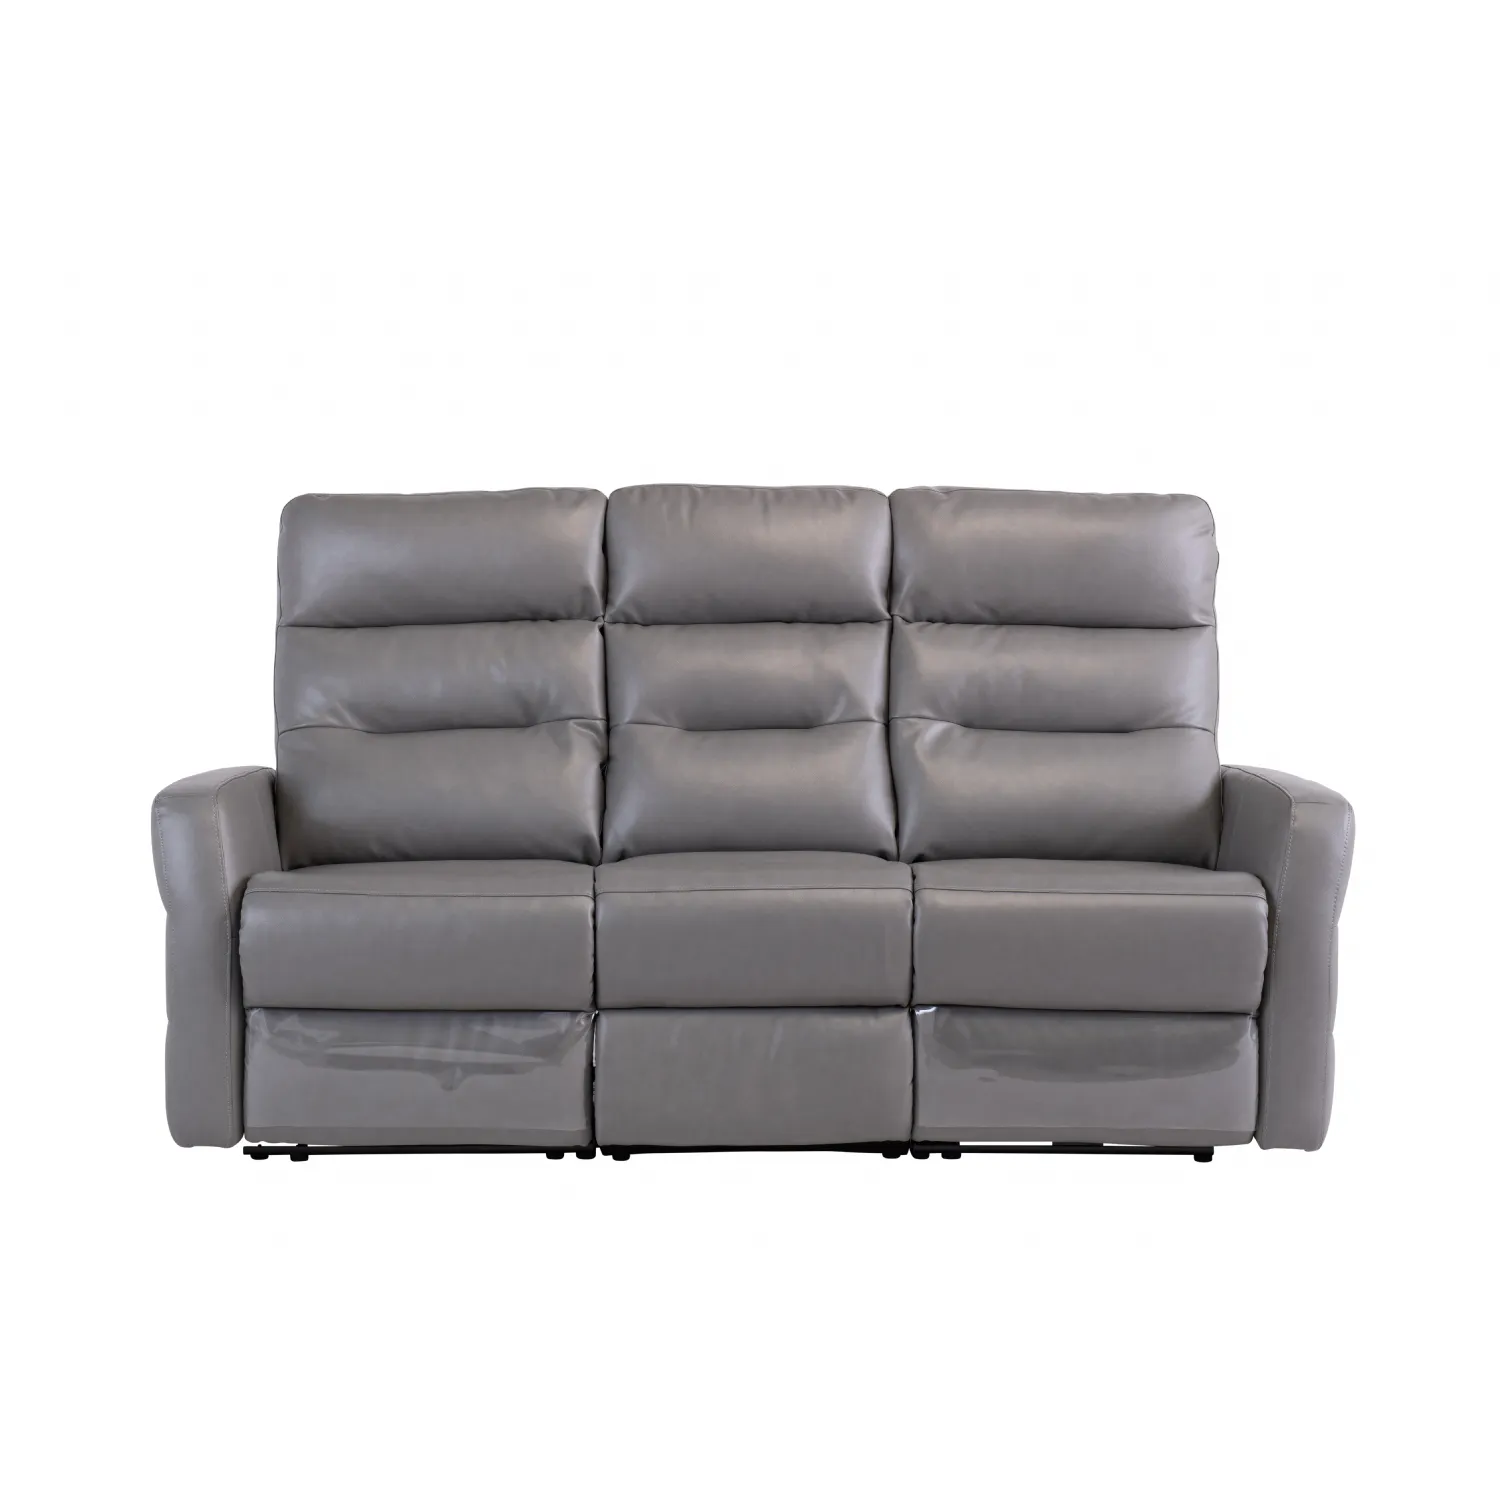 Light Grey Leather Electric Recliner 3 Seat Sofa